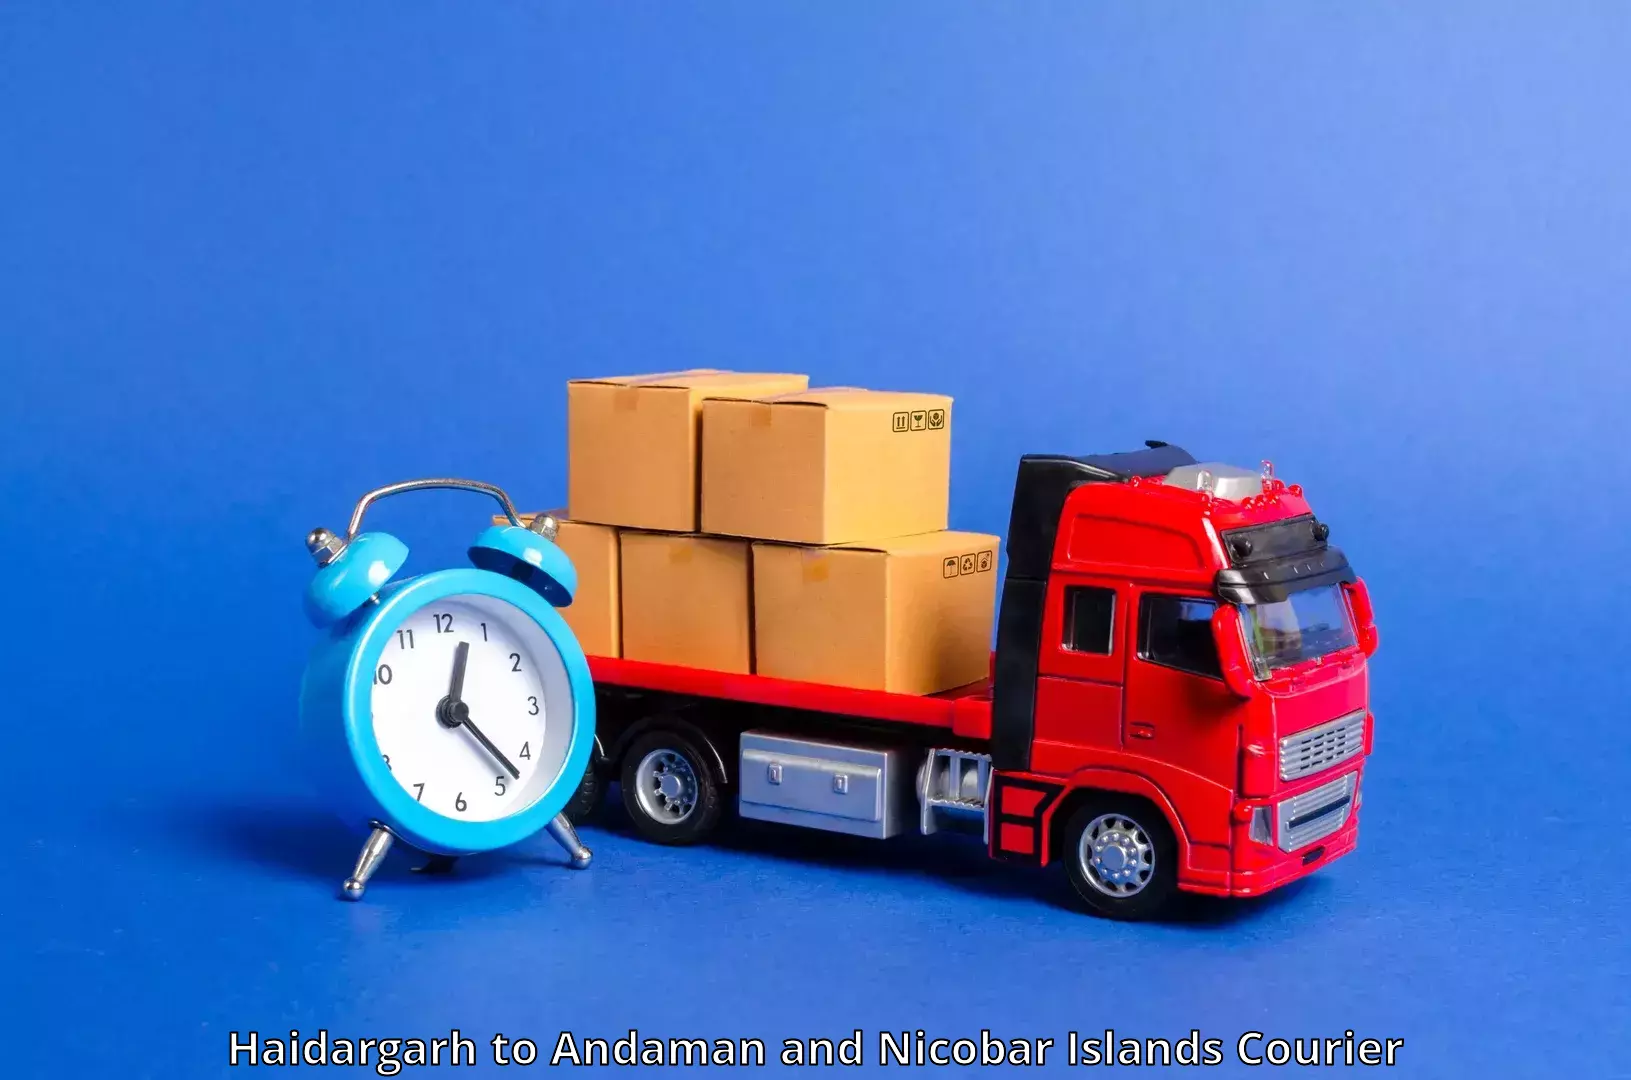 Reliable logistics providers in Haidargarh to North And Middle Andaman